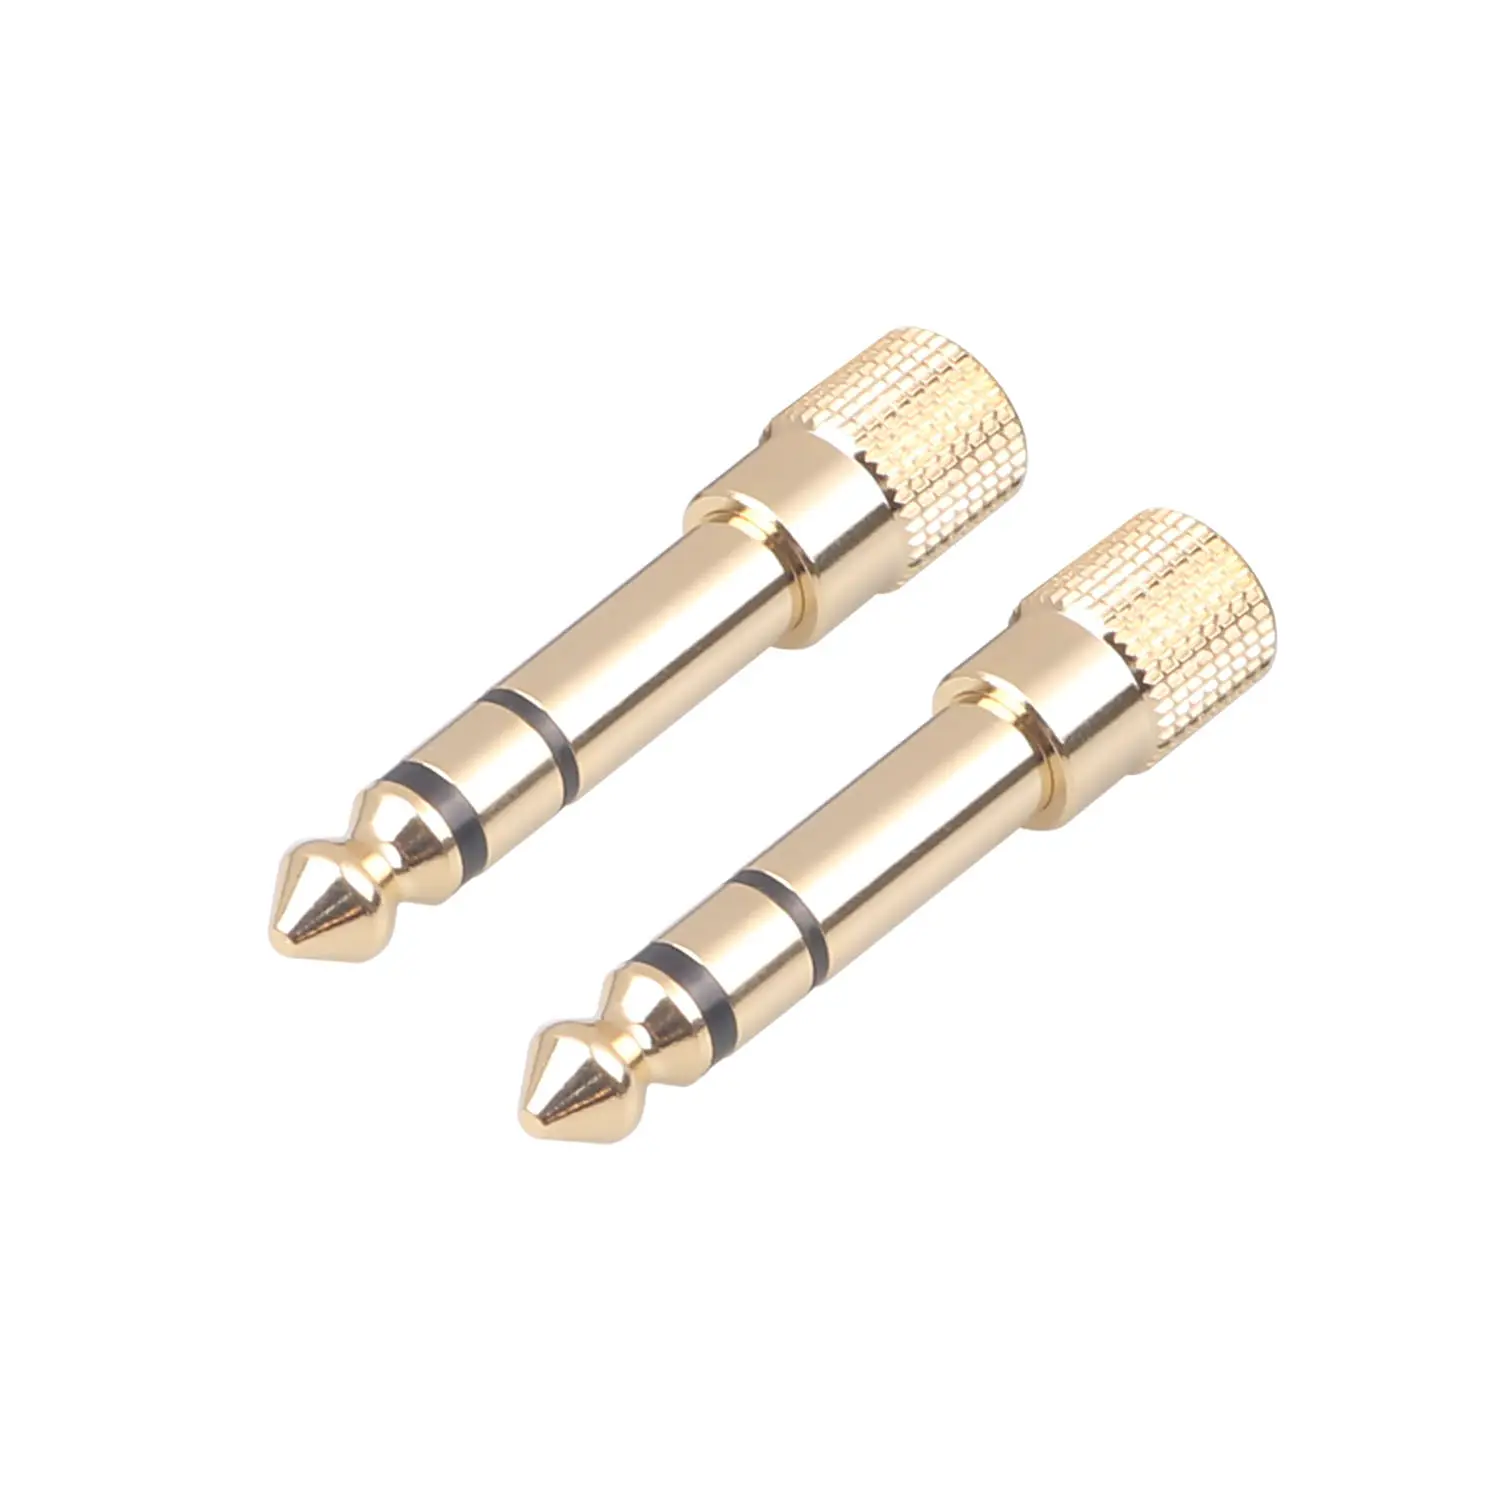 6.35mm 1/4" Male To 3.5mm 1/8" Female Audio Adapter Jack Stereo Connect Converter For guitar equipment